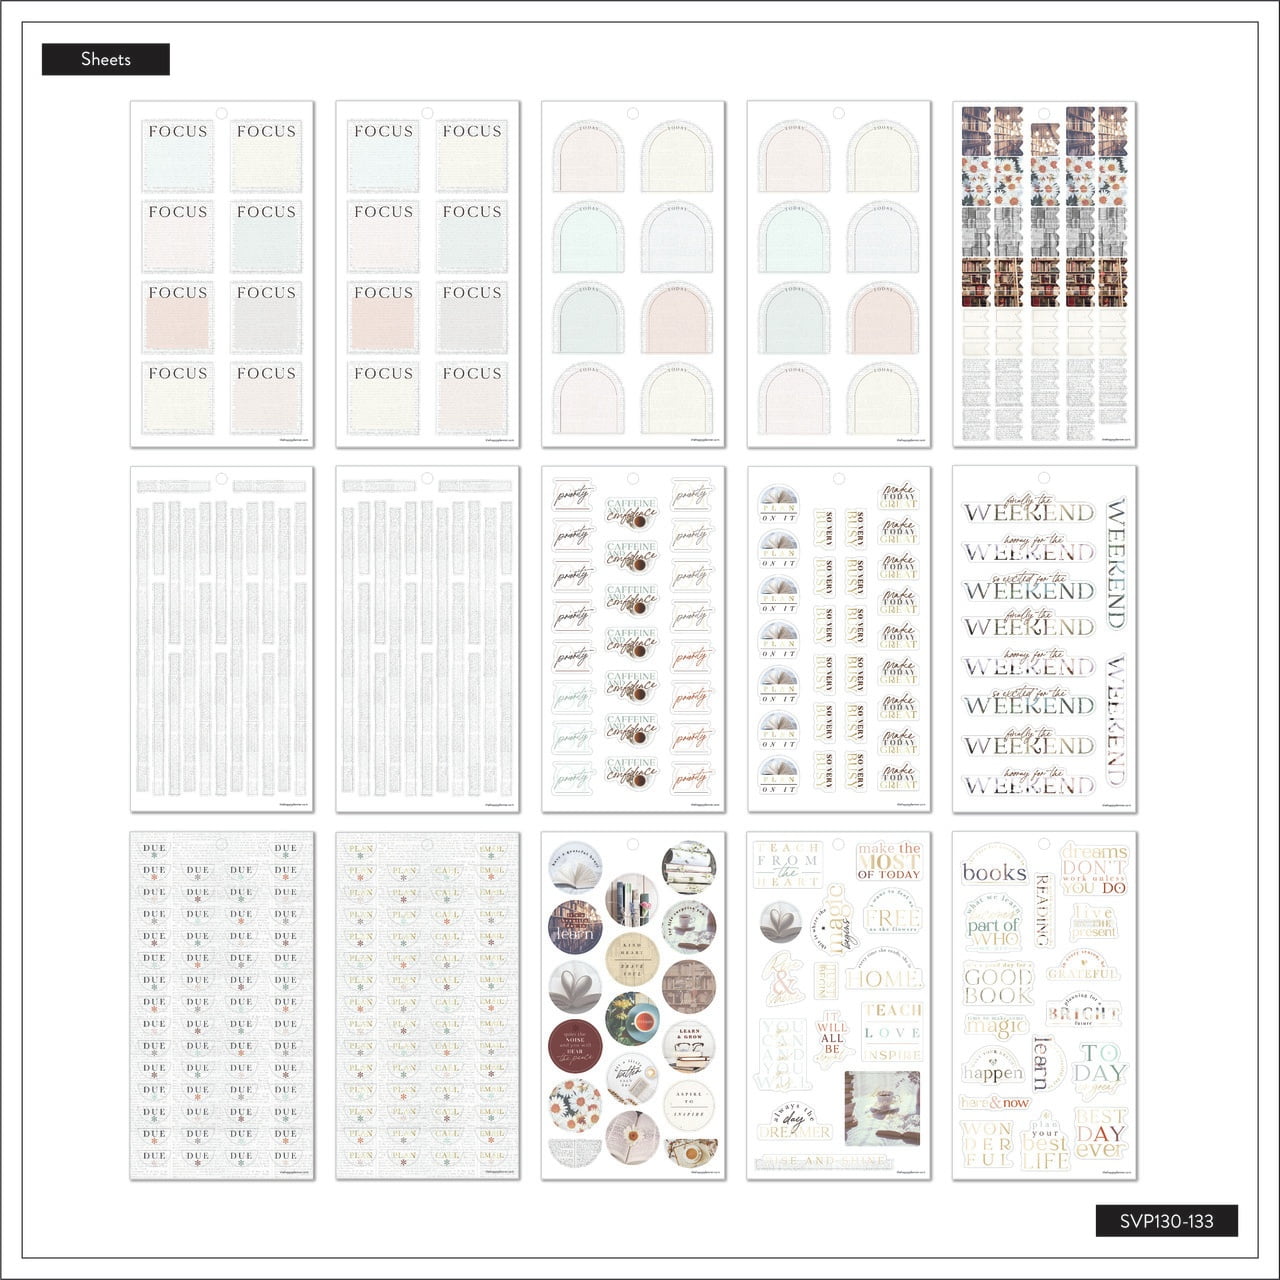 Bookish Daily Planner Stickers – Pinnacle Sticker Co